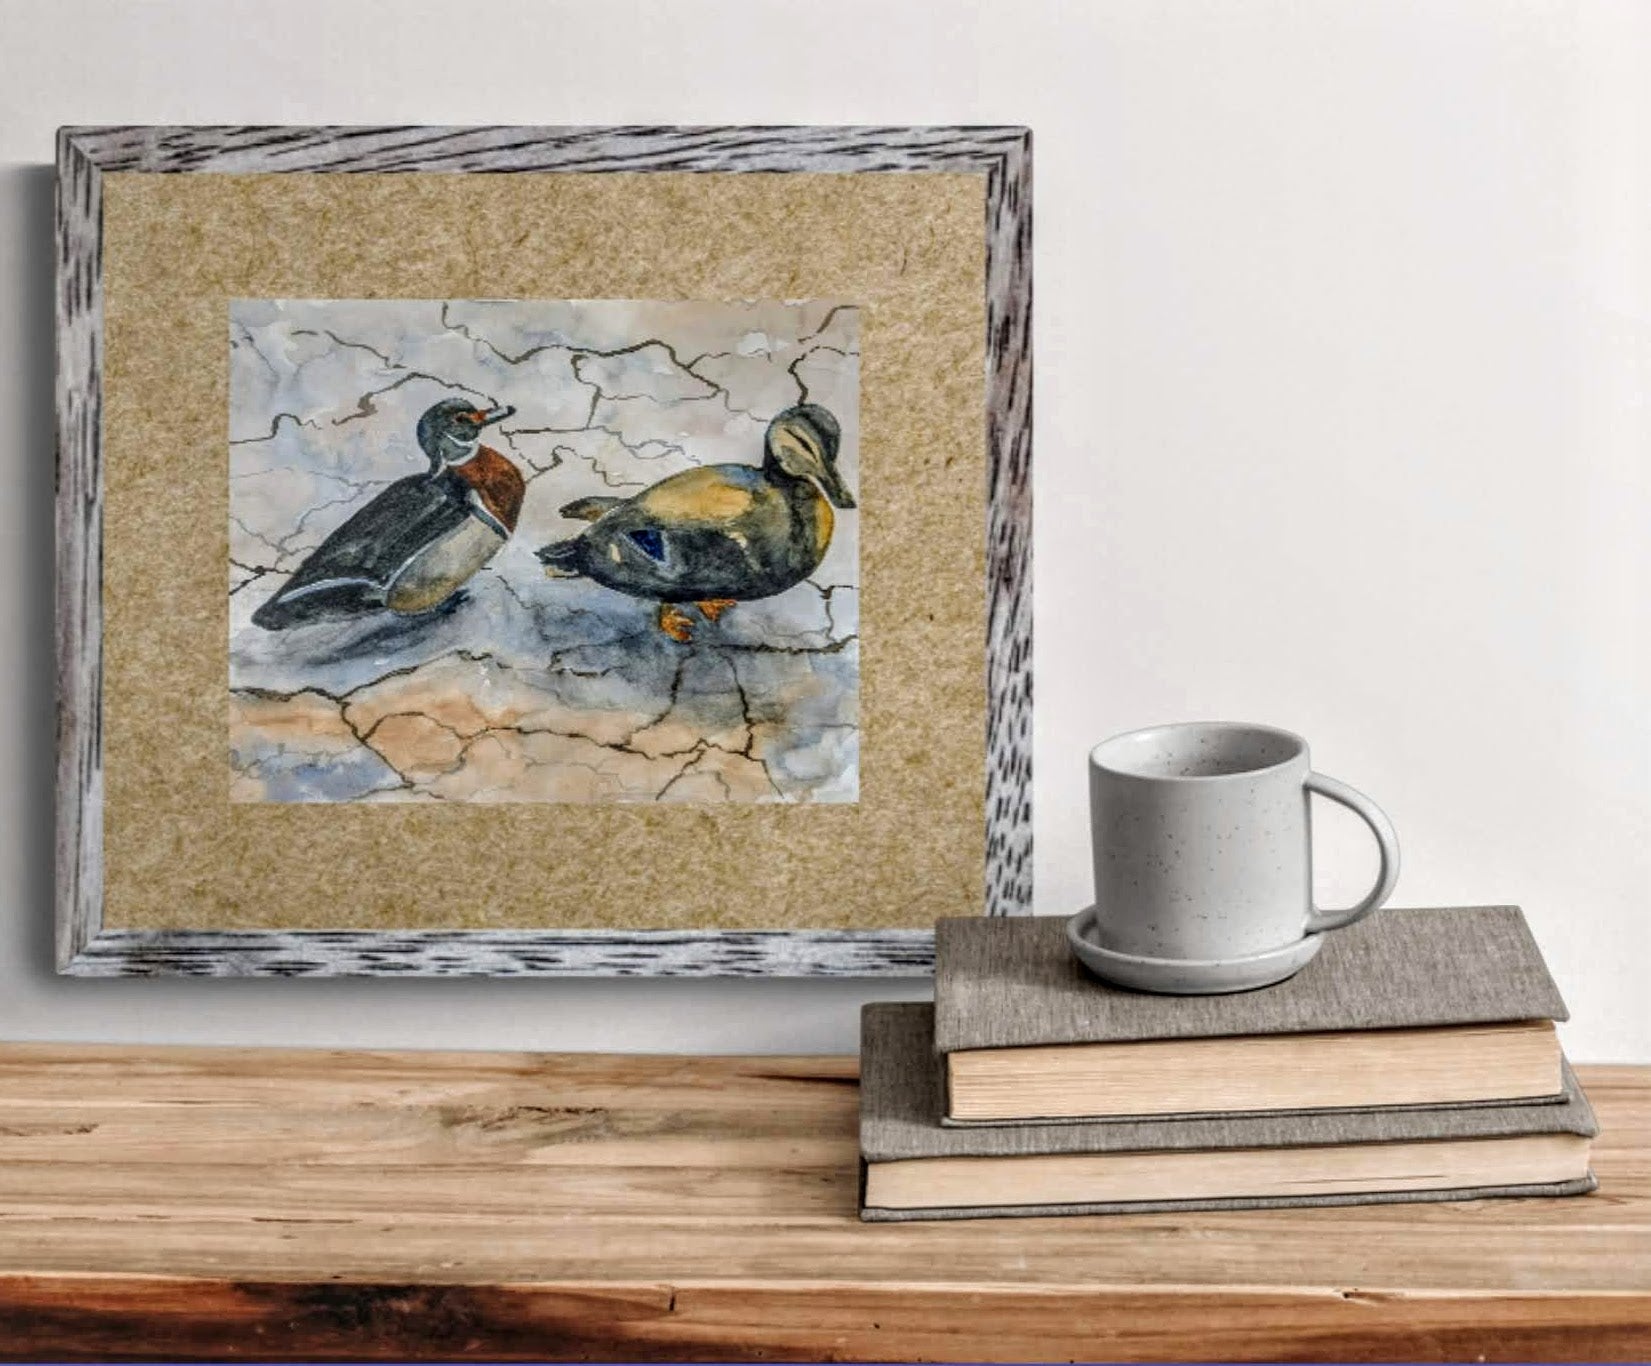 Ducks at a Picnic watercolor painting above the bookshelf